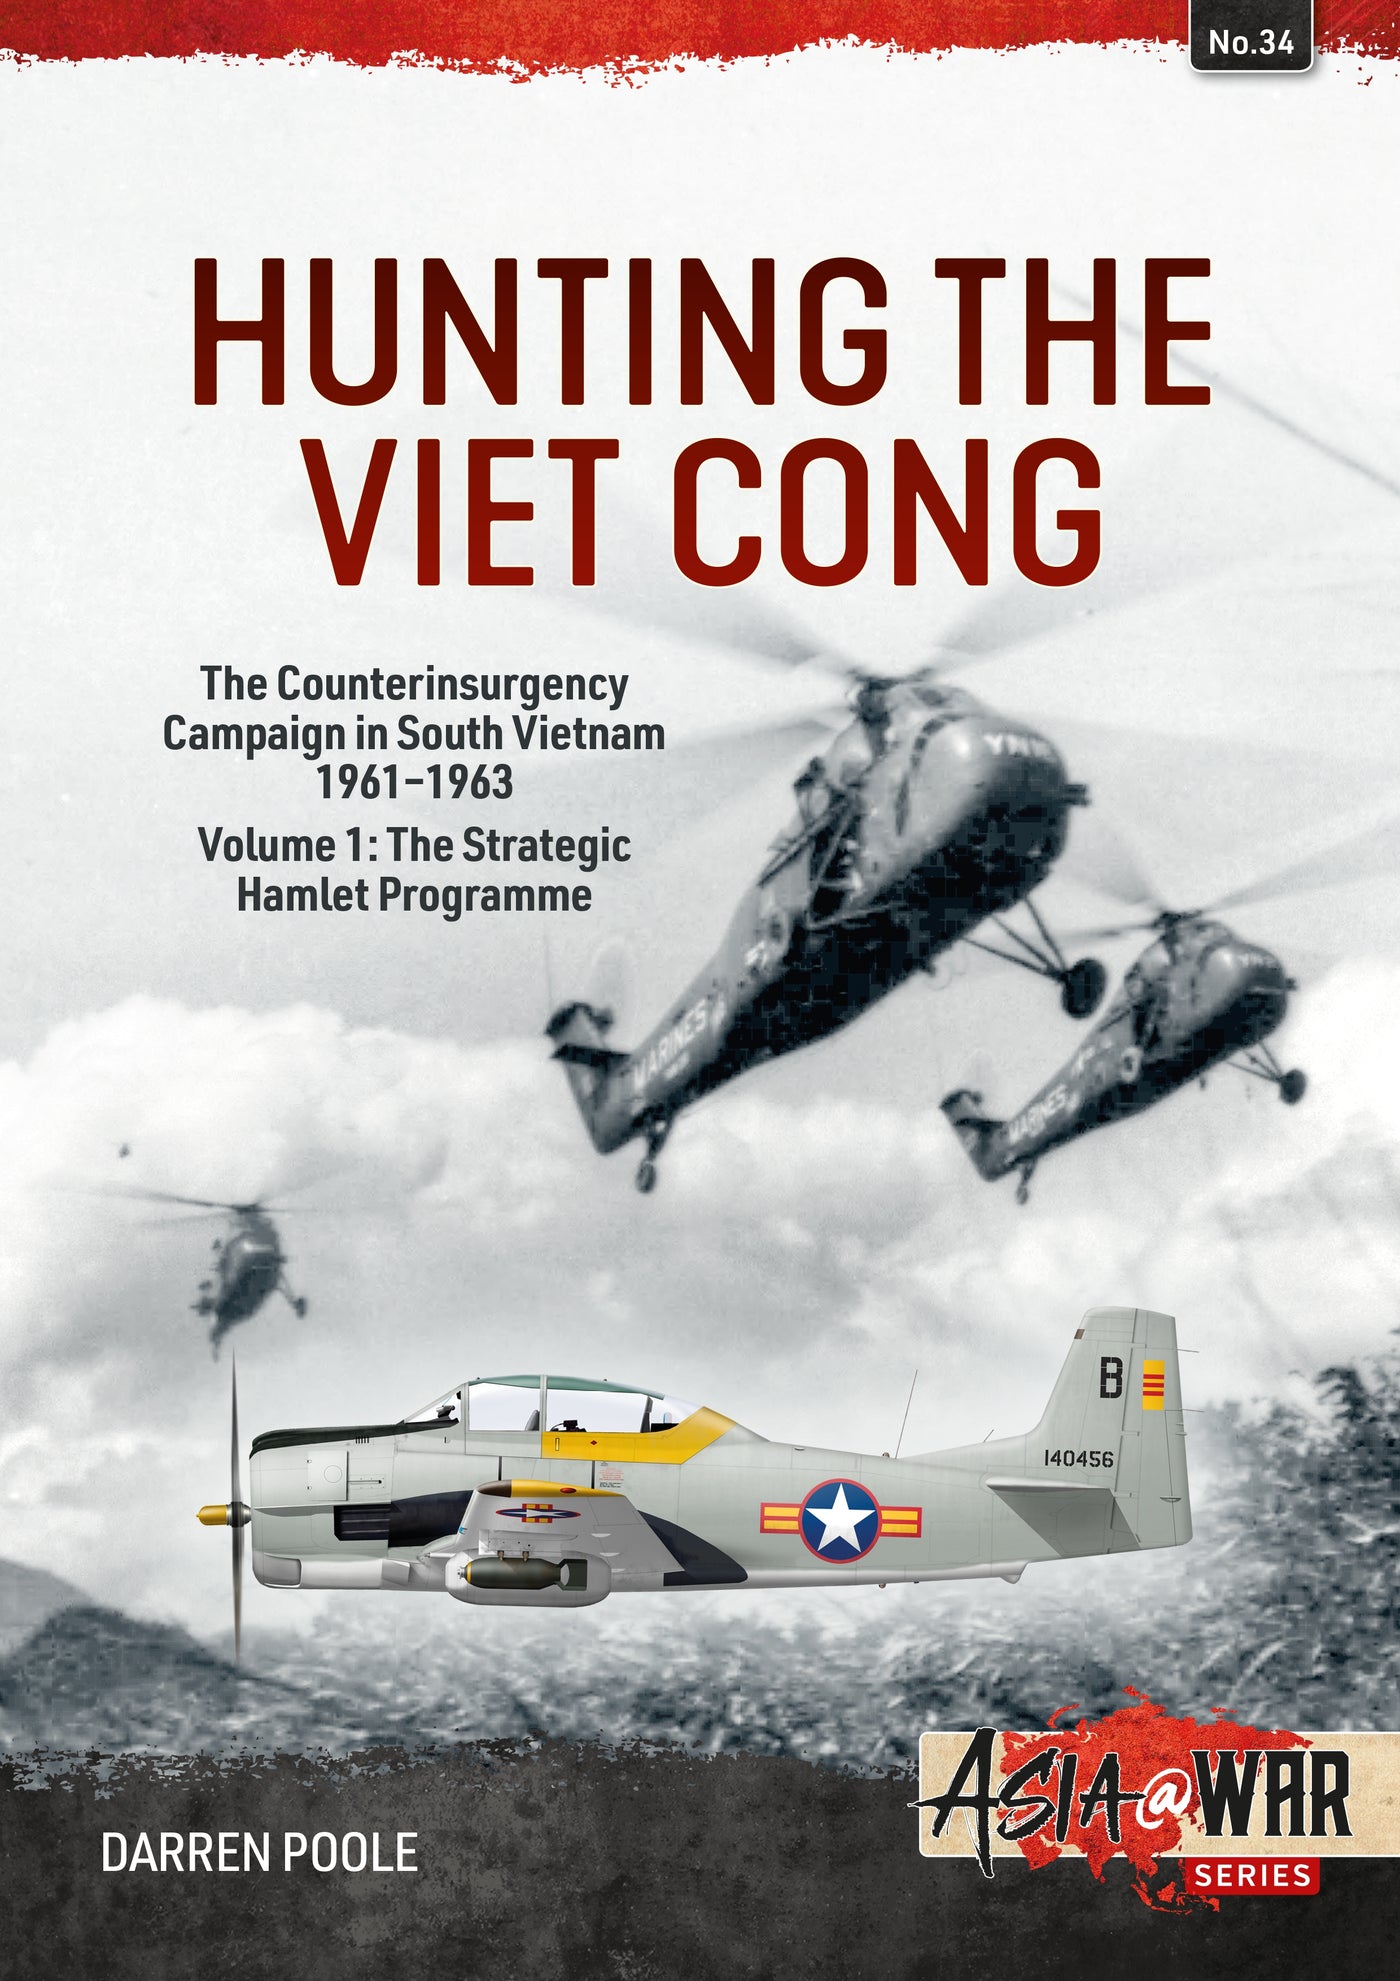 Hunting the Viet Cong — The Counterinsurgency Campaign in South Vietnam, 1961-1963